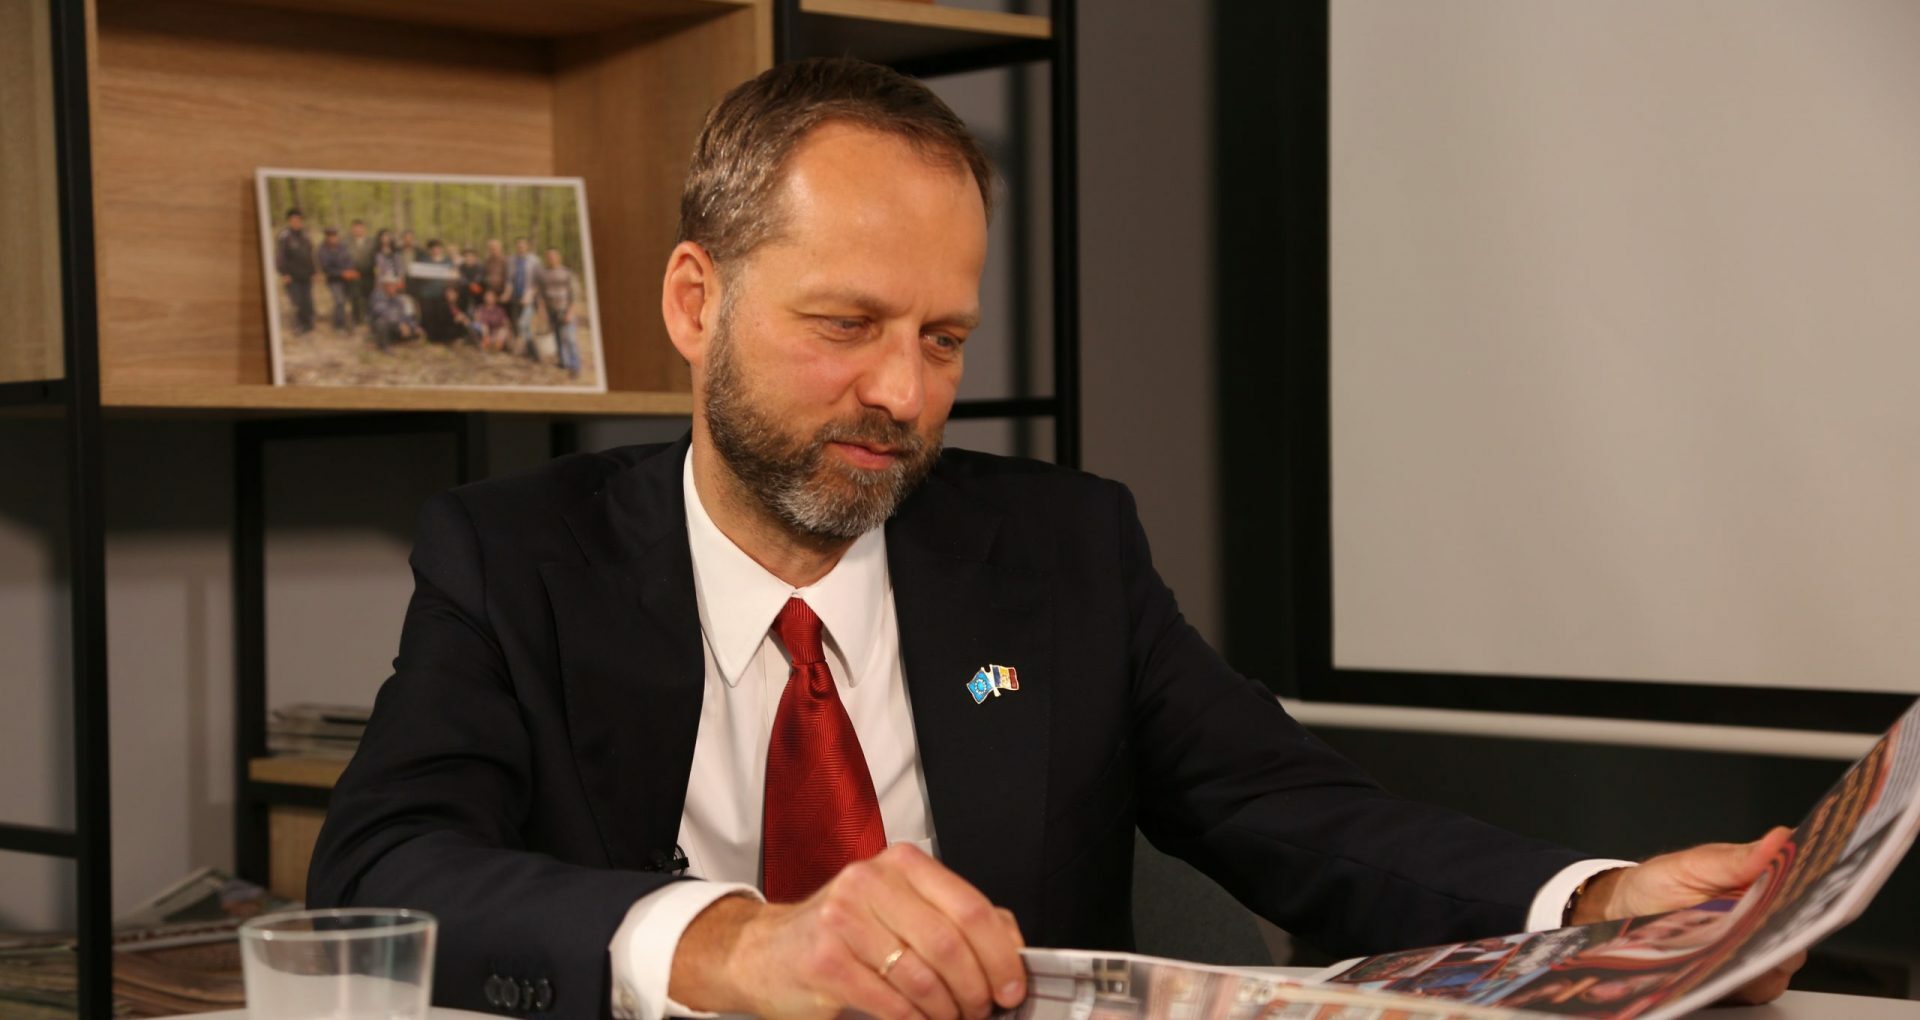 “In Moldova, now is the time when people can make history, in a way that might not be possible in 5 or 10 years.” Interview with Jānis Mažeiks, Ambassador, Head of the EU Delegation to Moldova – VIDEO